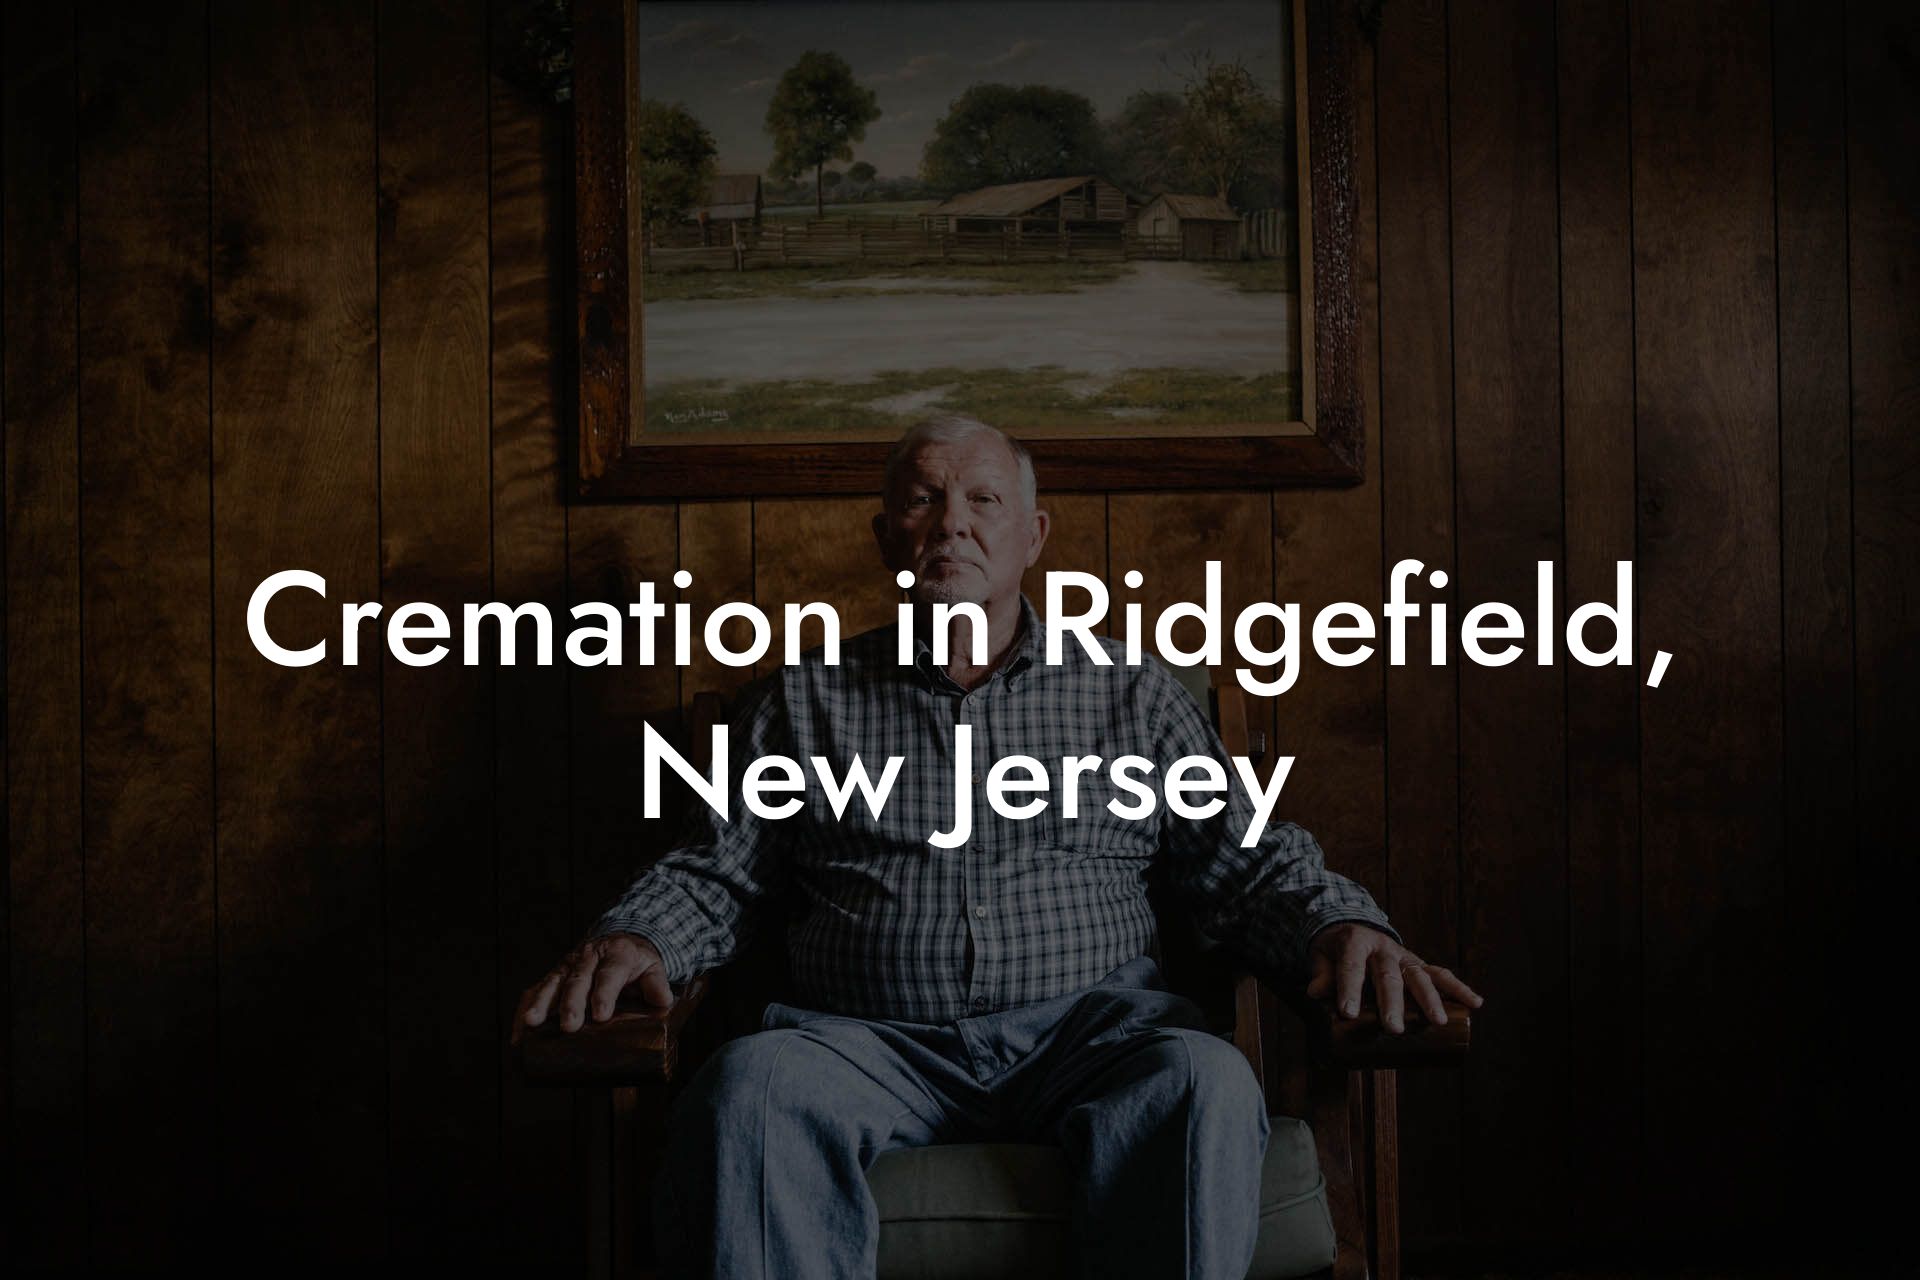 Cremation in Ridgefield, New Jersey